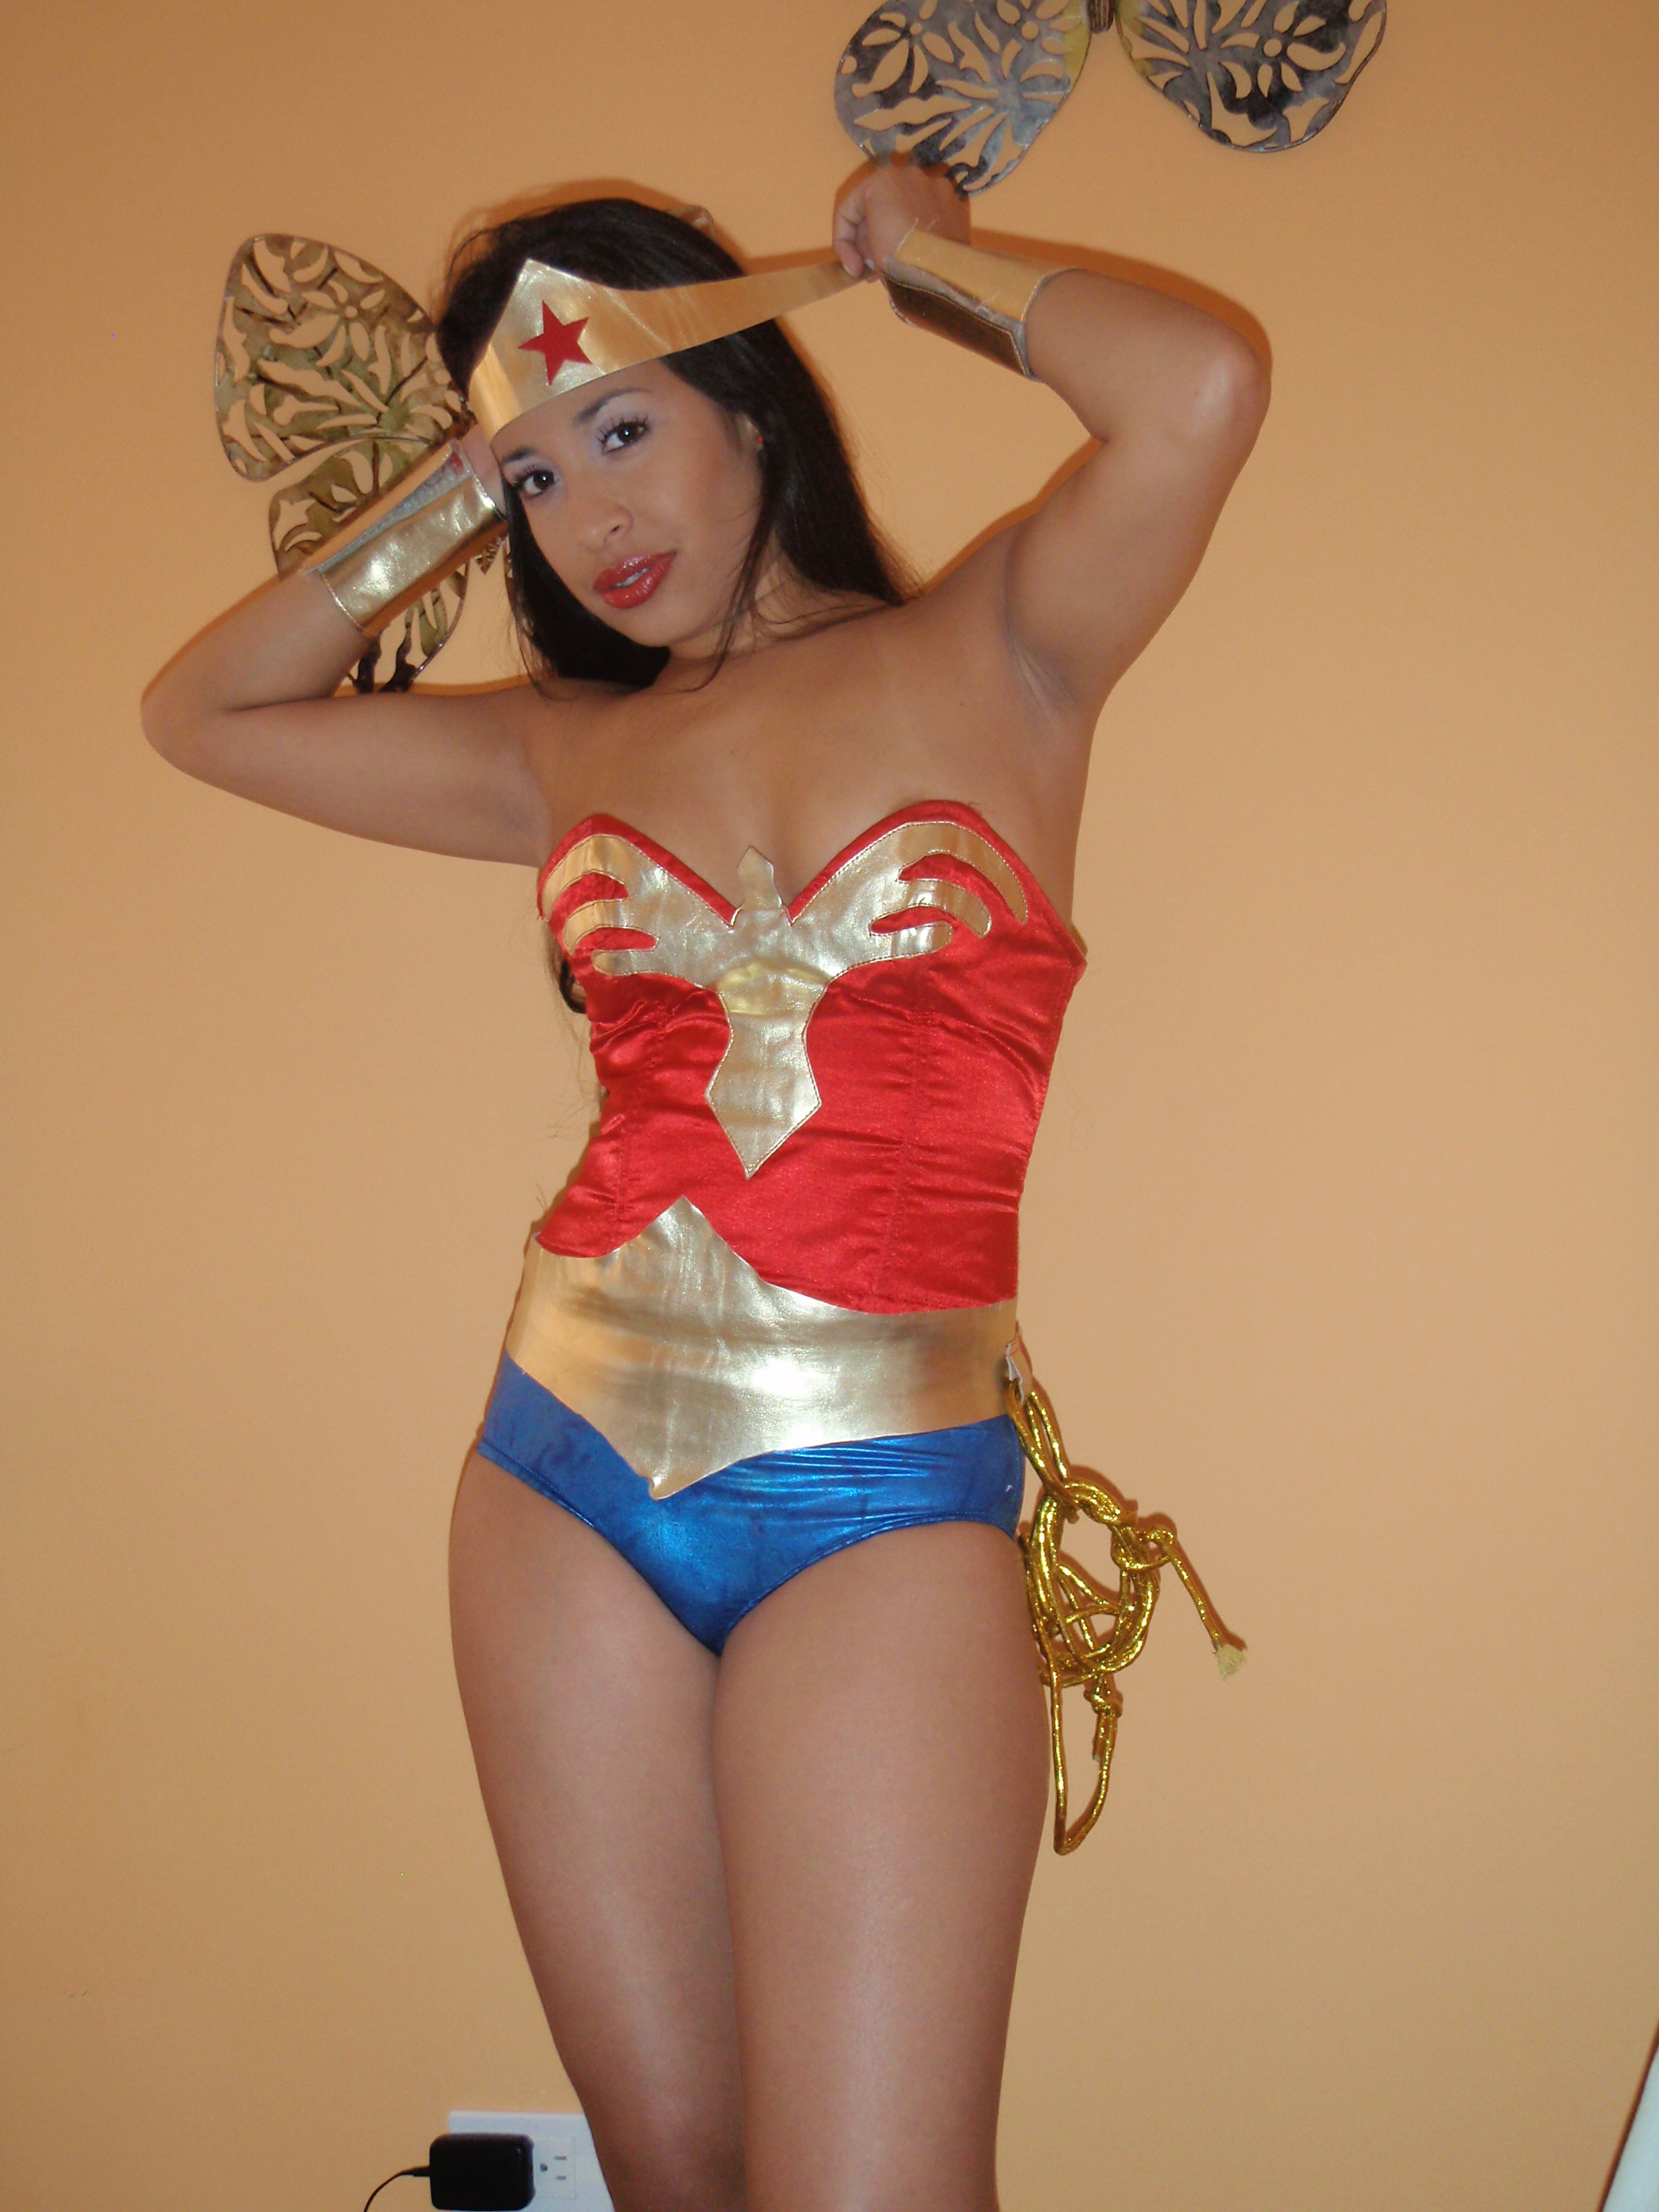 From Sexy Diana Prince to Sexy Wonder Woman 8